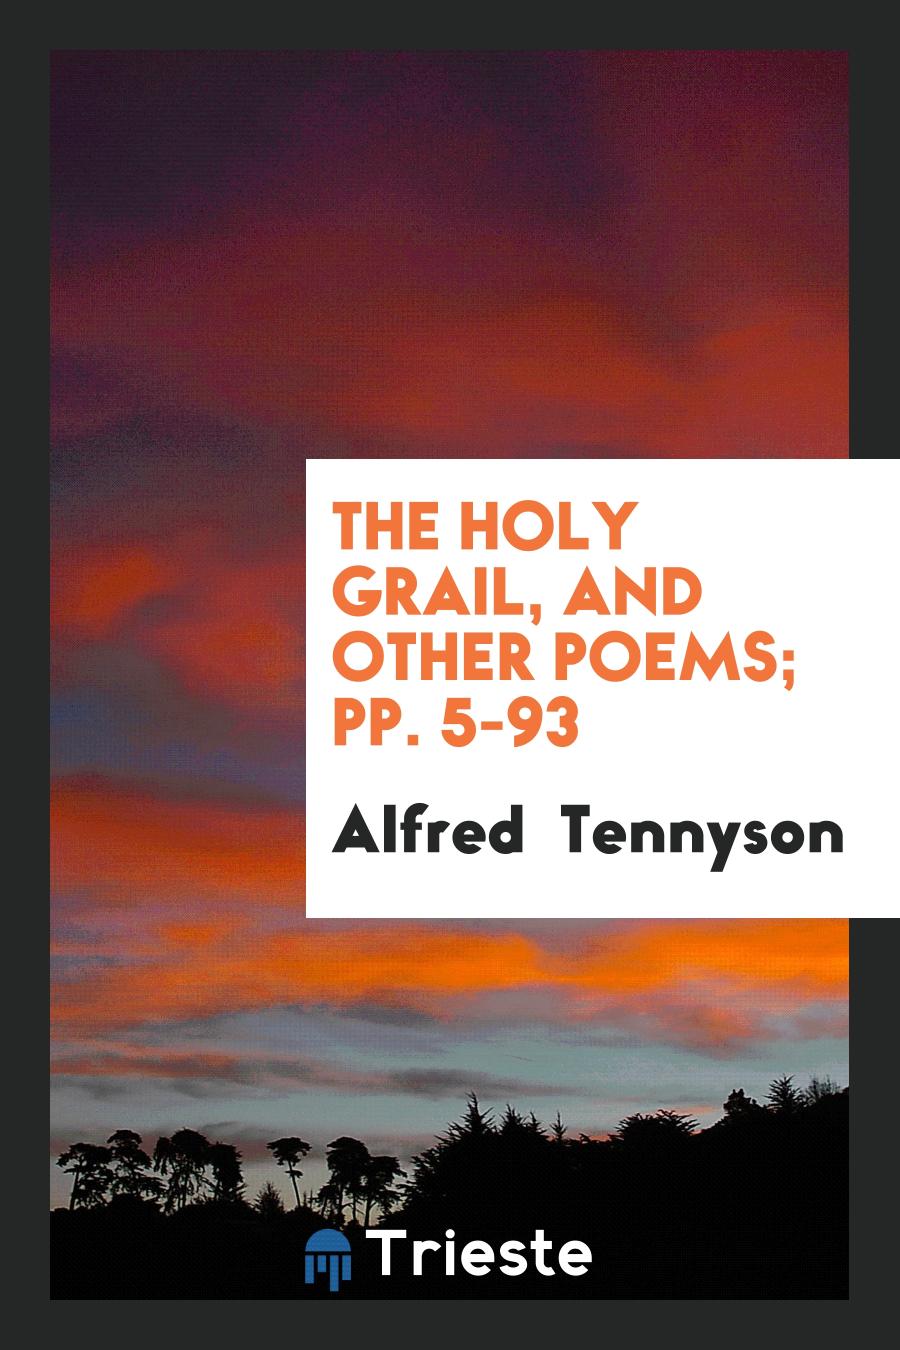 The Holy Grail, And Other Poems; pp. 5-93